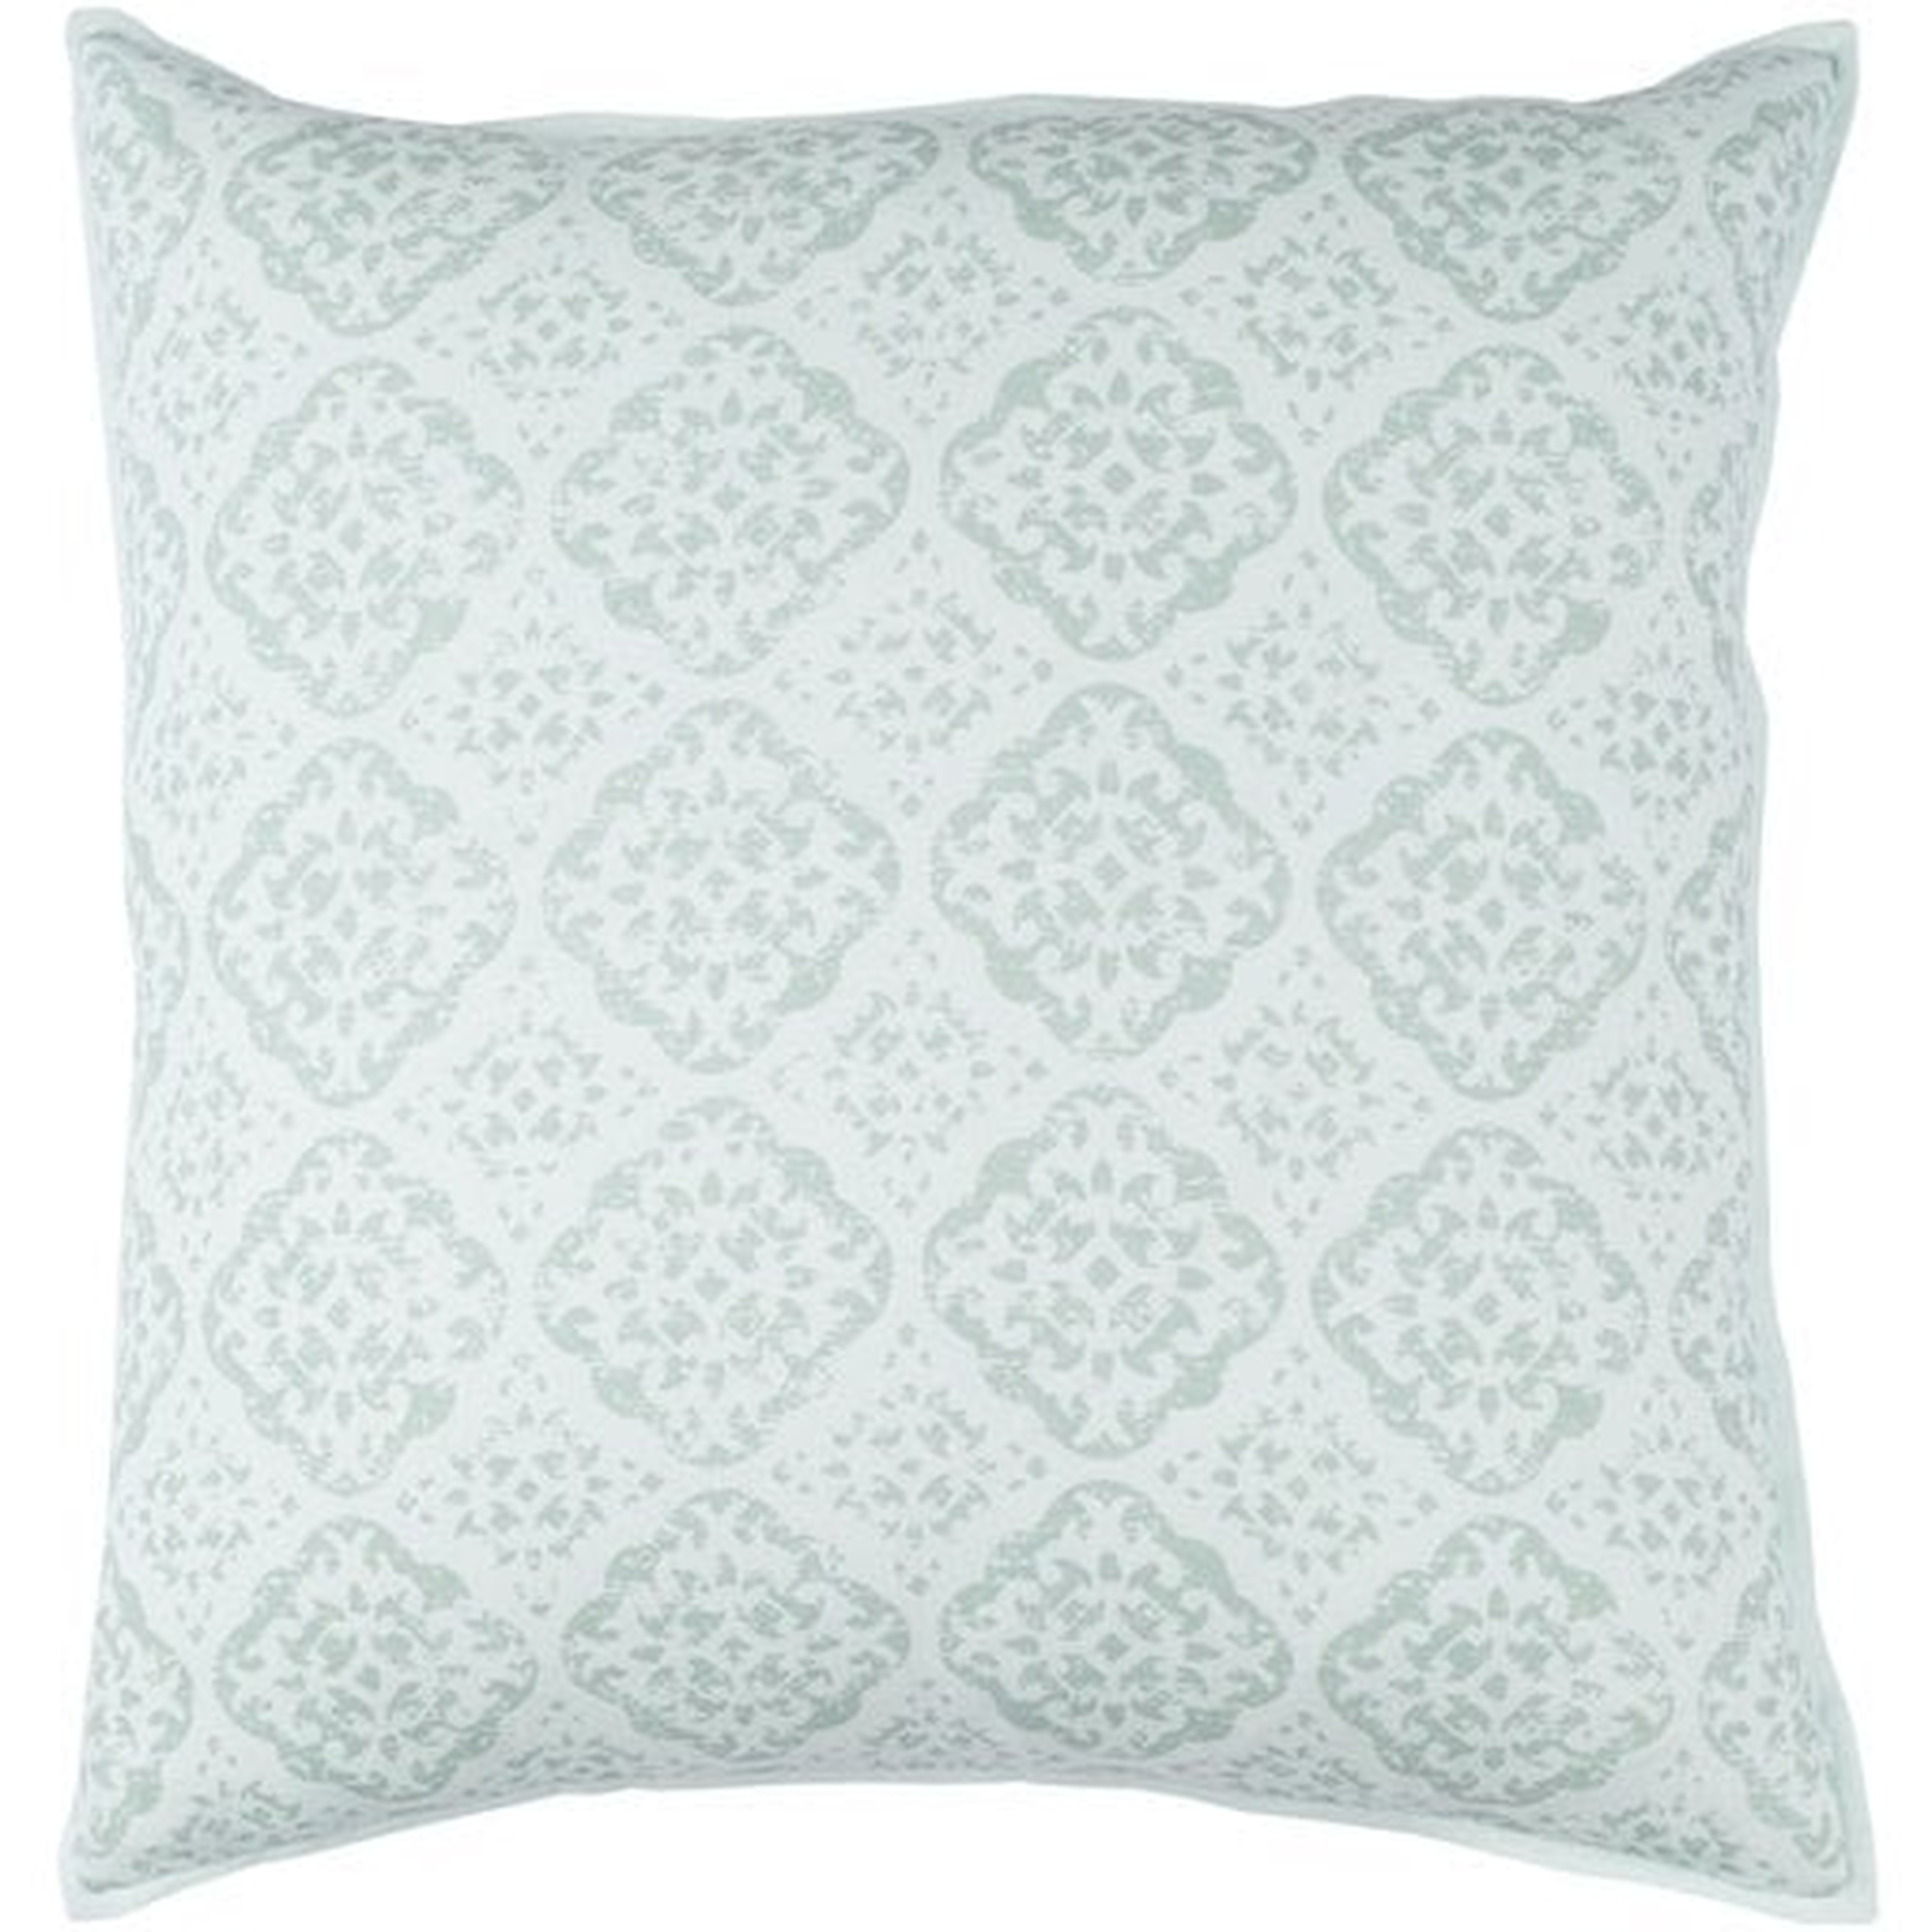 D'Orsay Throw Pillow, 20" x 20", with down insert - Surya